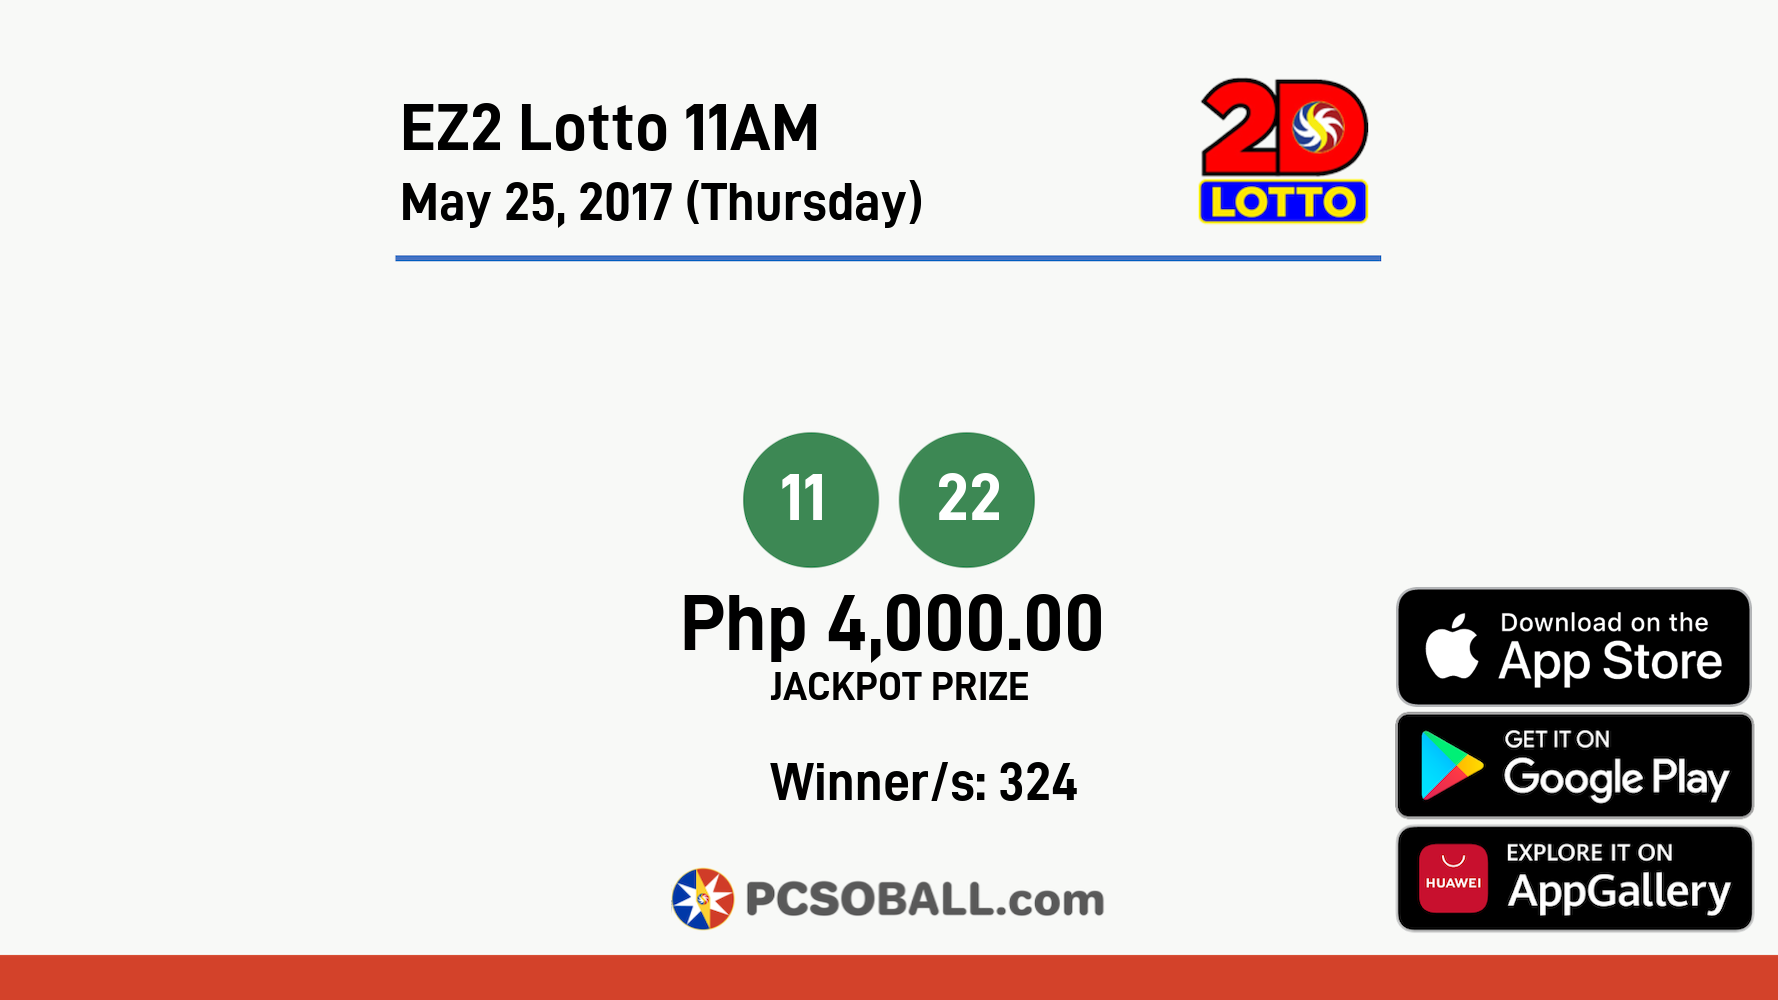 EZ2 Lotto 11AM May 25, 2017 (Thursday) Result